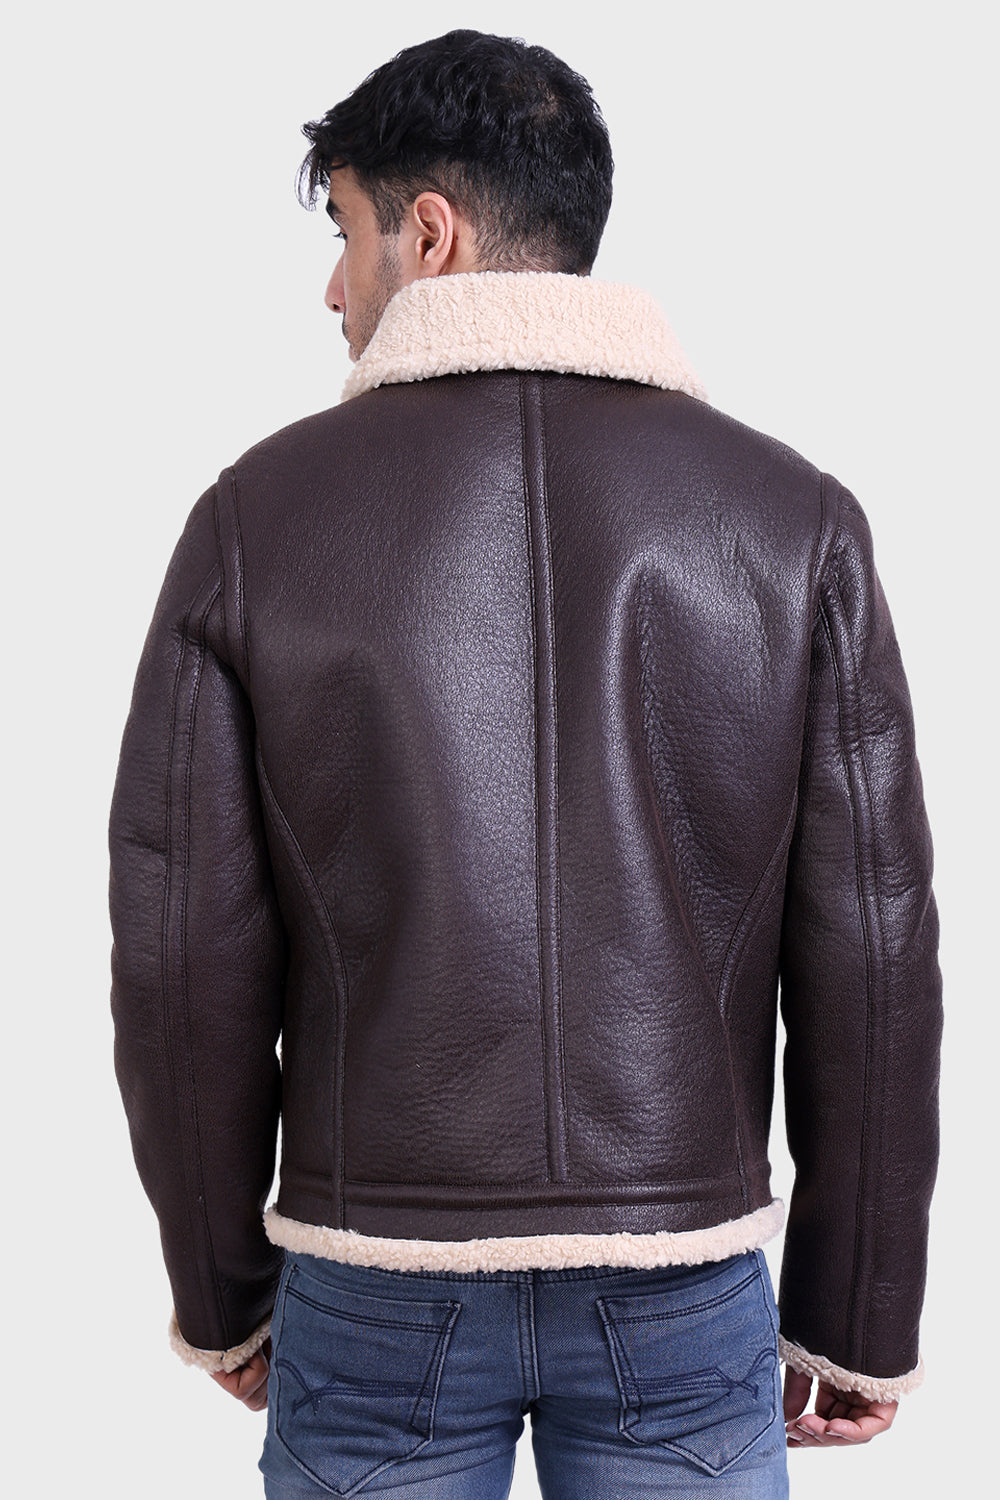 Justanned Faux Fur Top Gun Leather Jacket